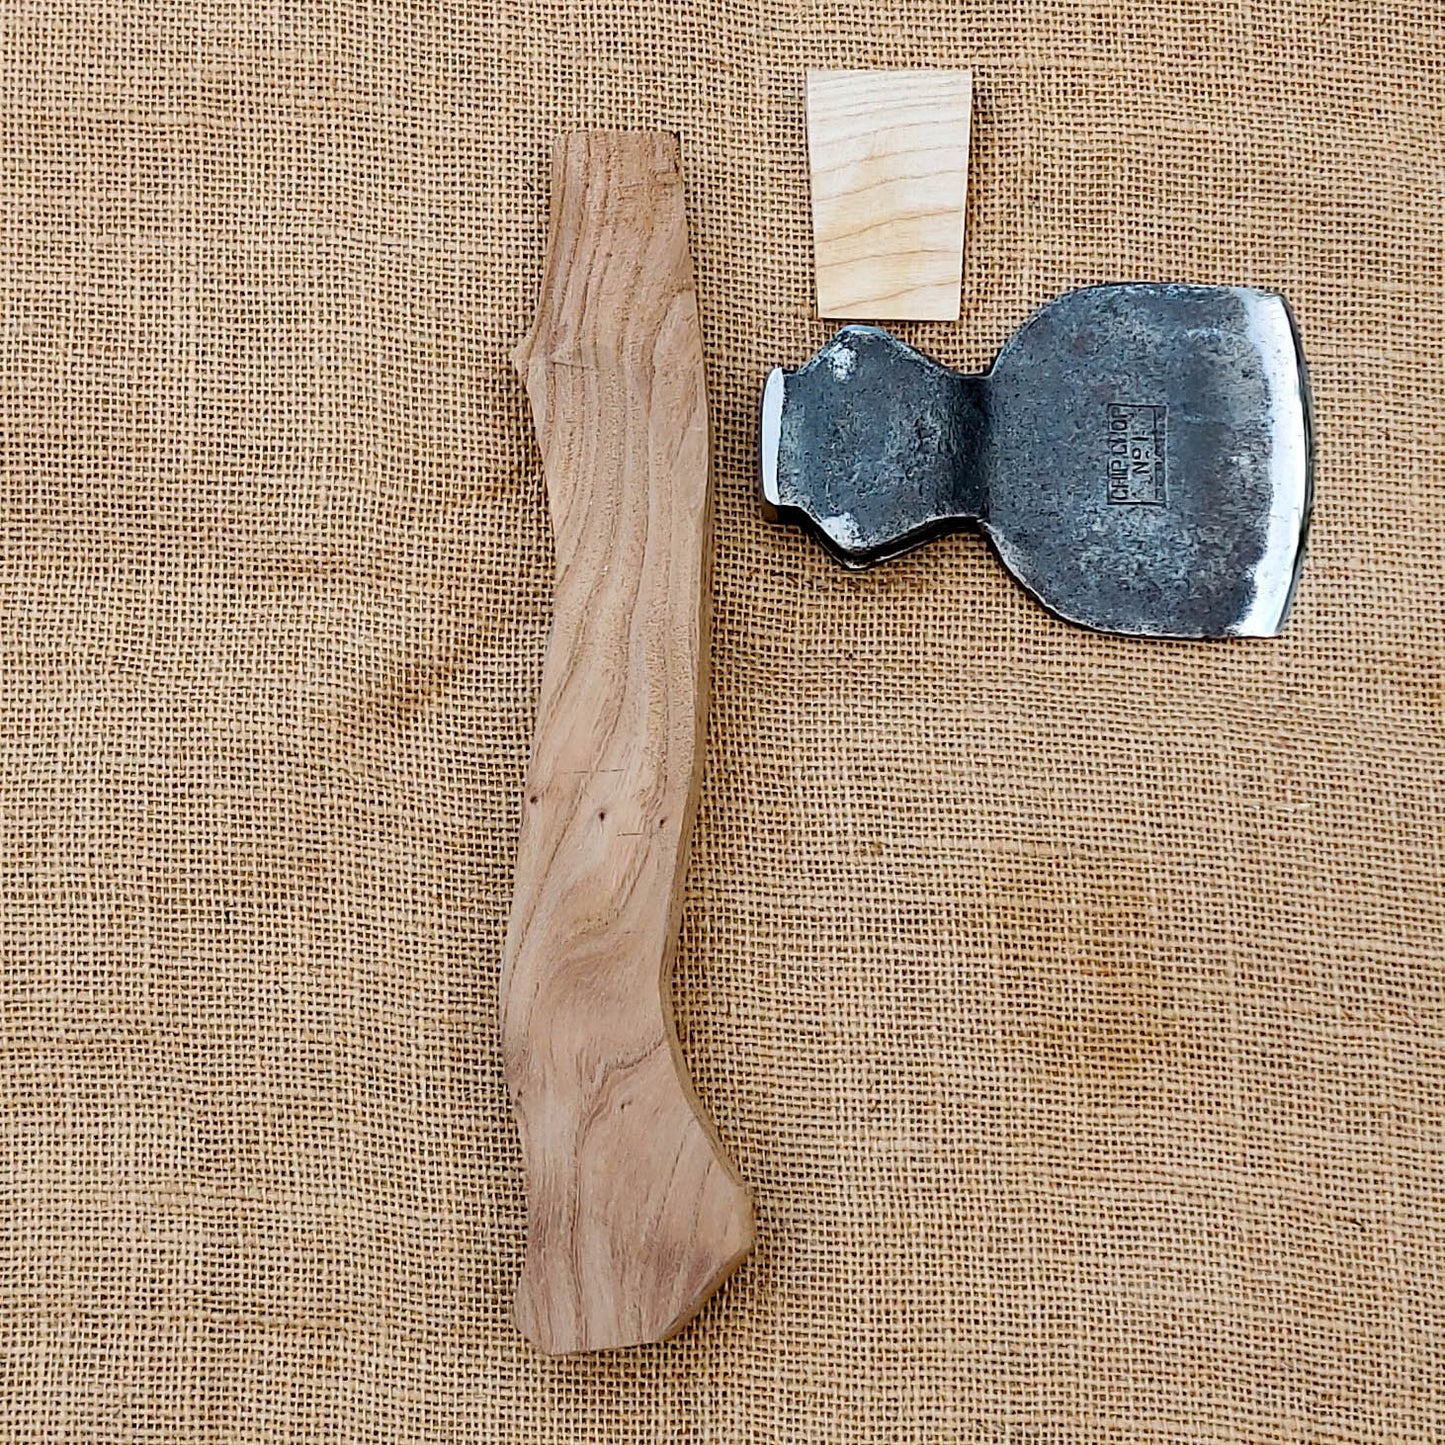 Vintage Axe Restoration Kit - Handle your own!